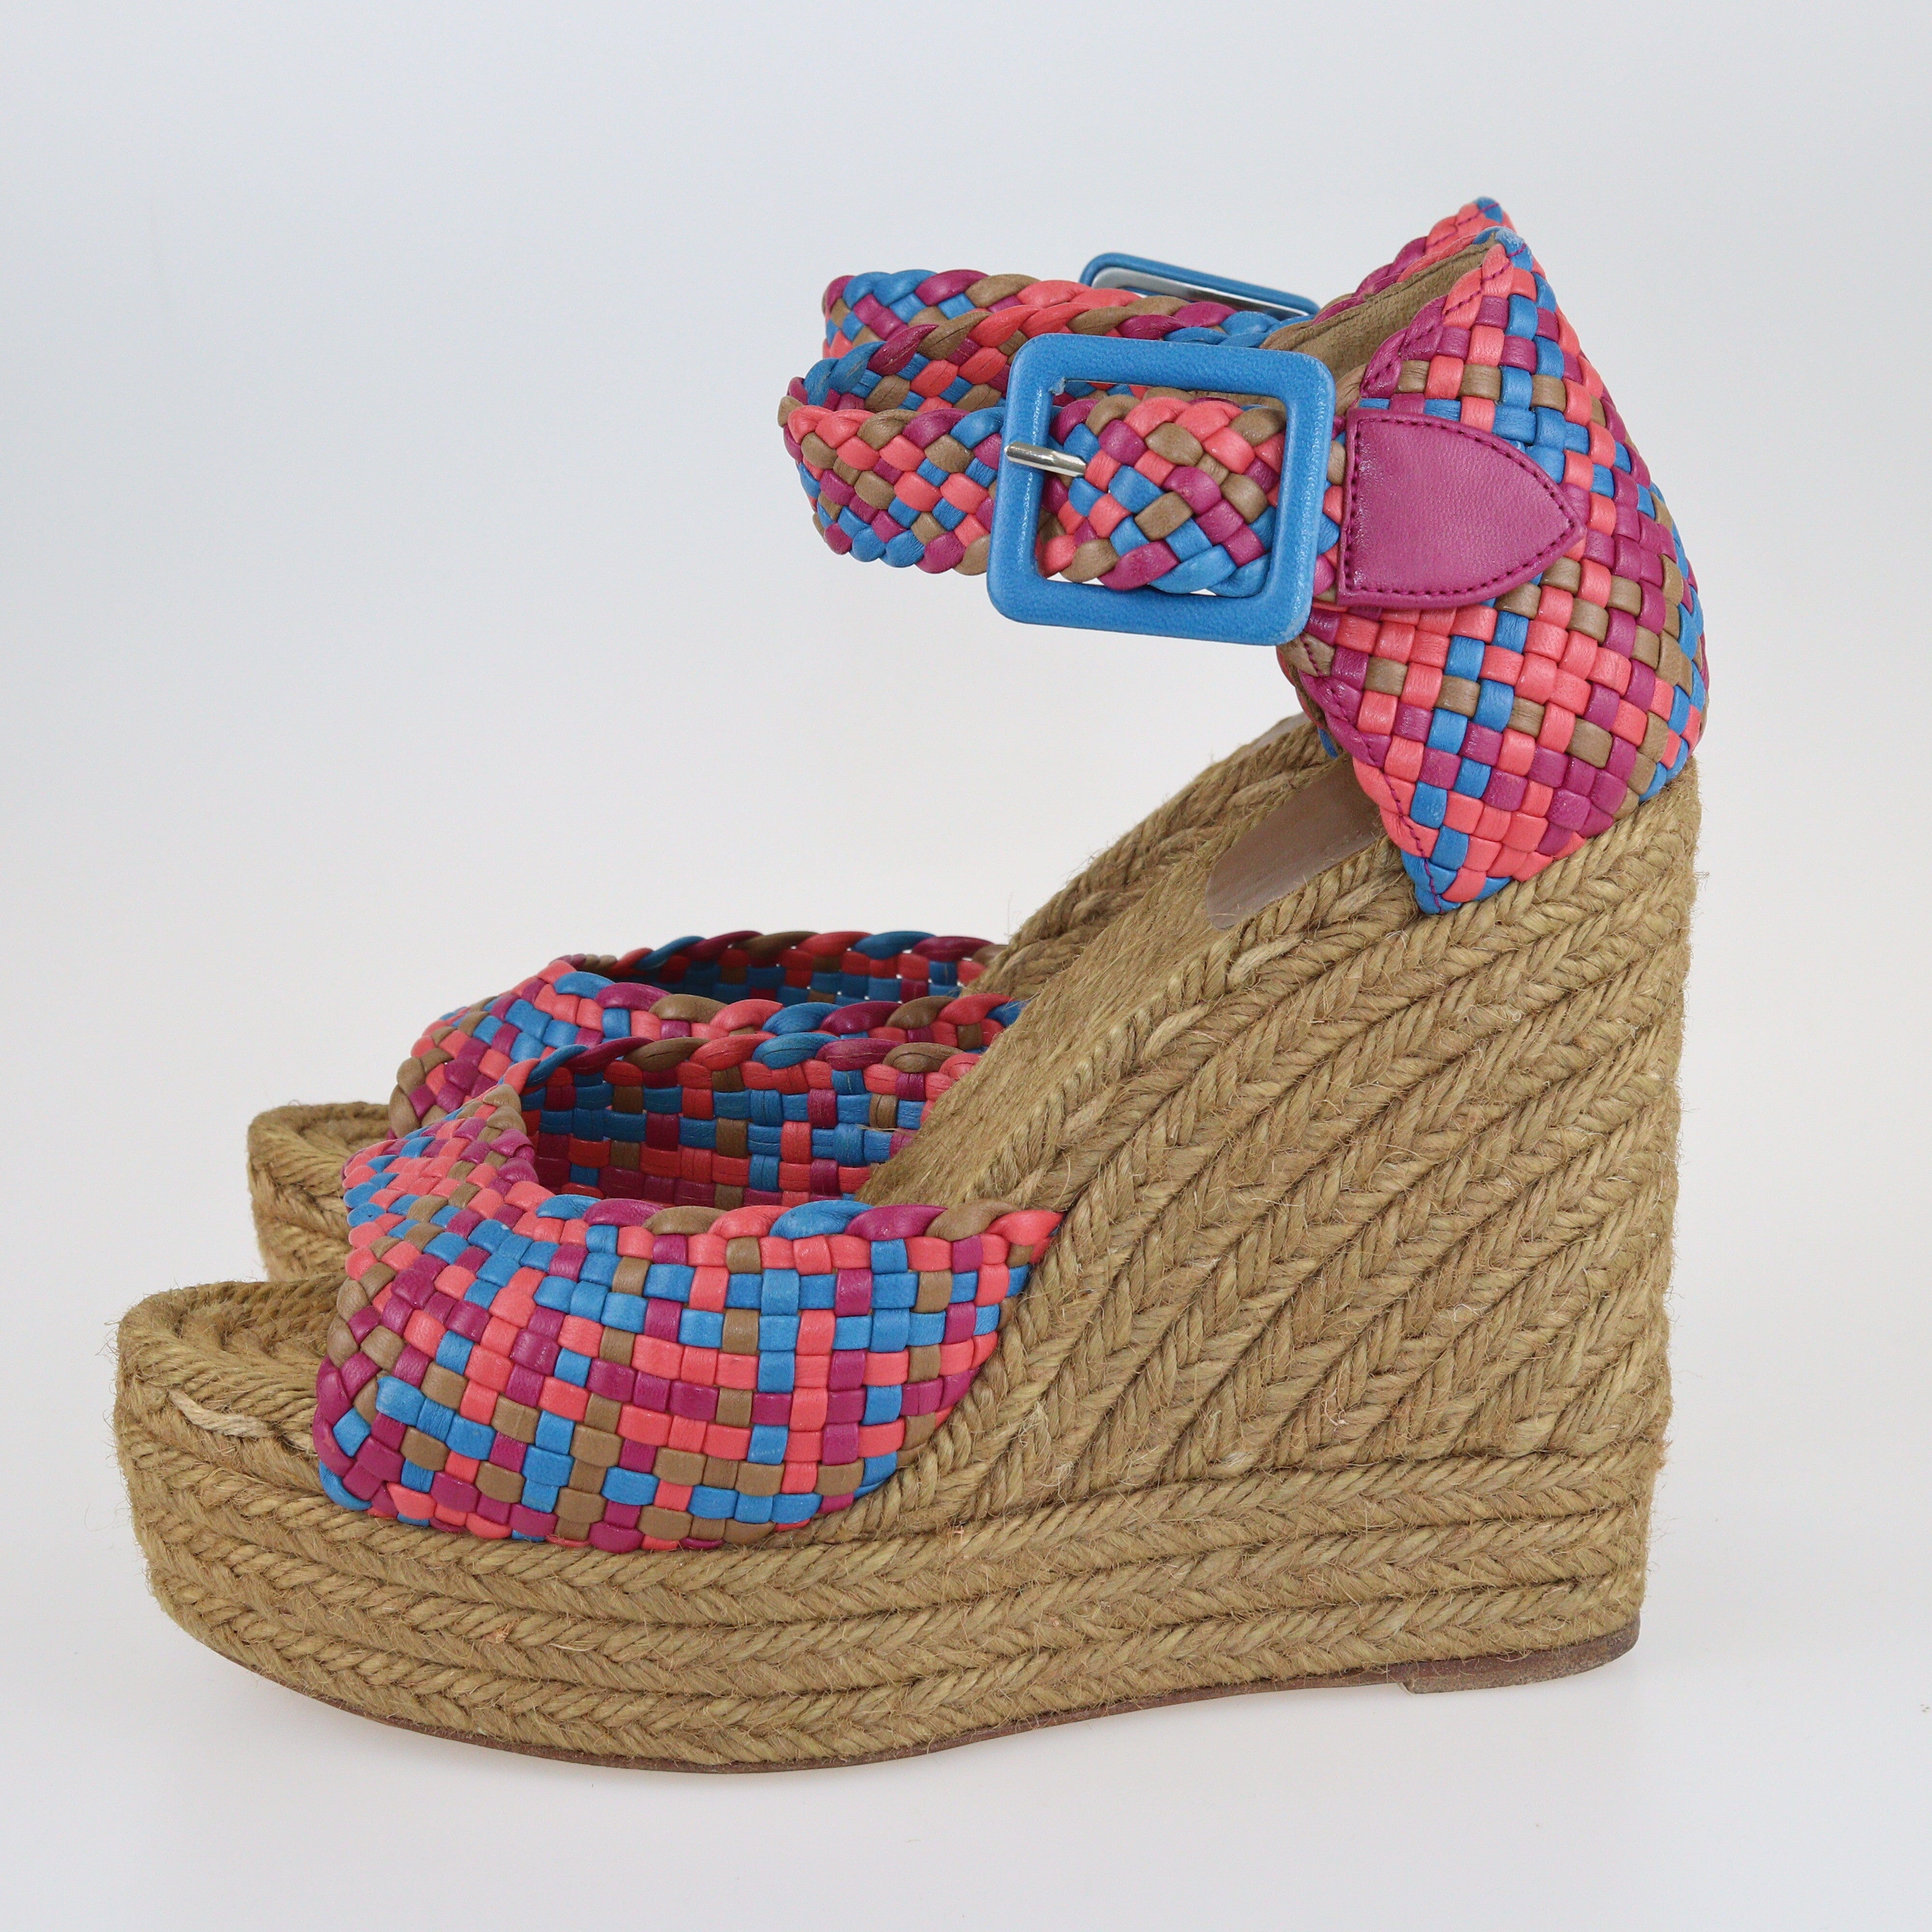 Hermes Multicolor Woven Leather Espadrille Wedge Sandals Shoes Hermes 